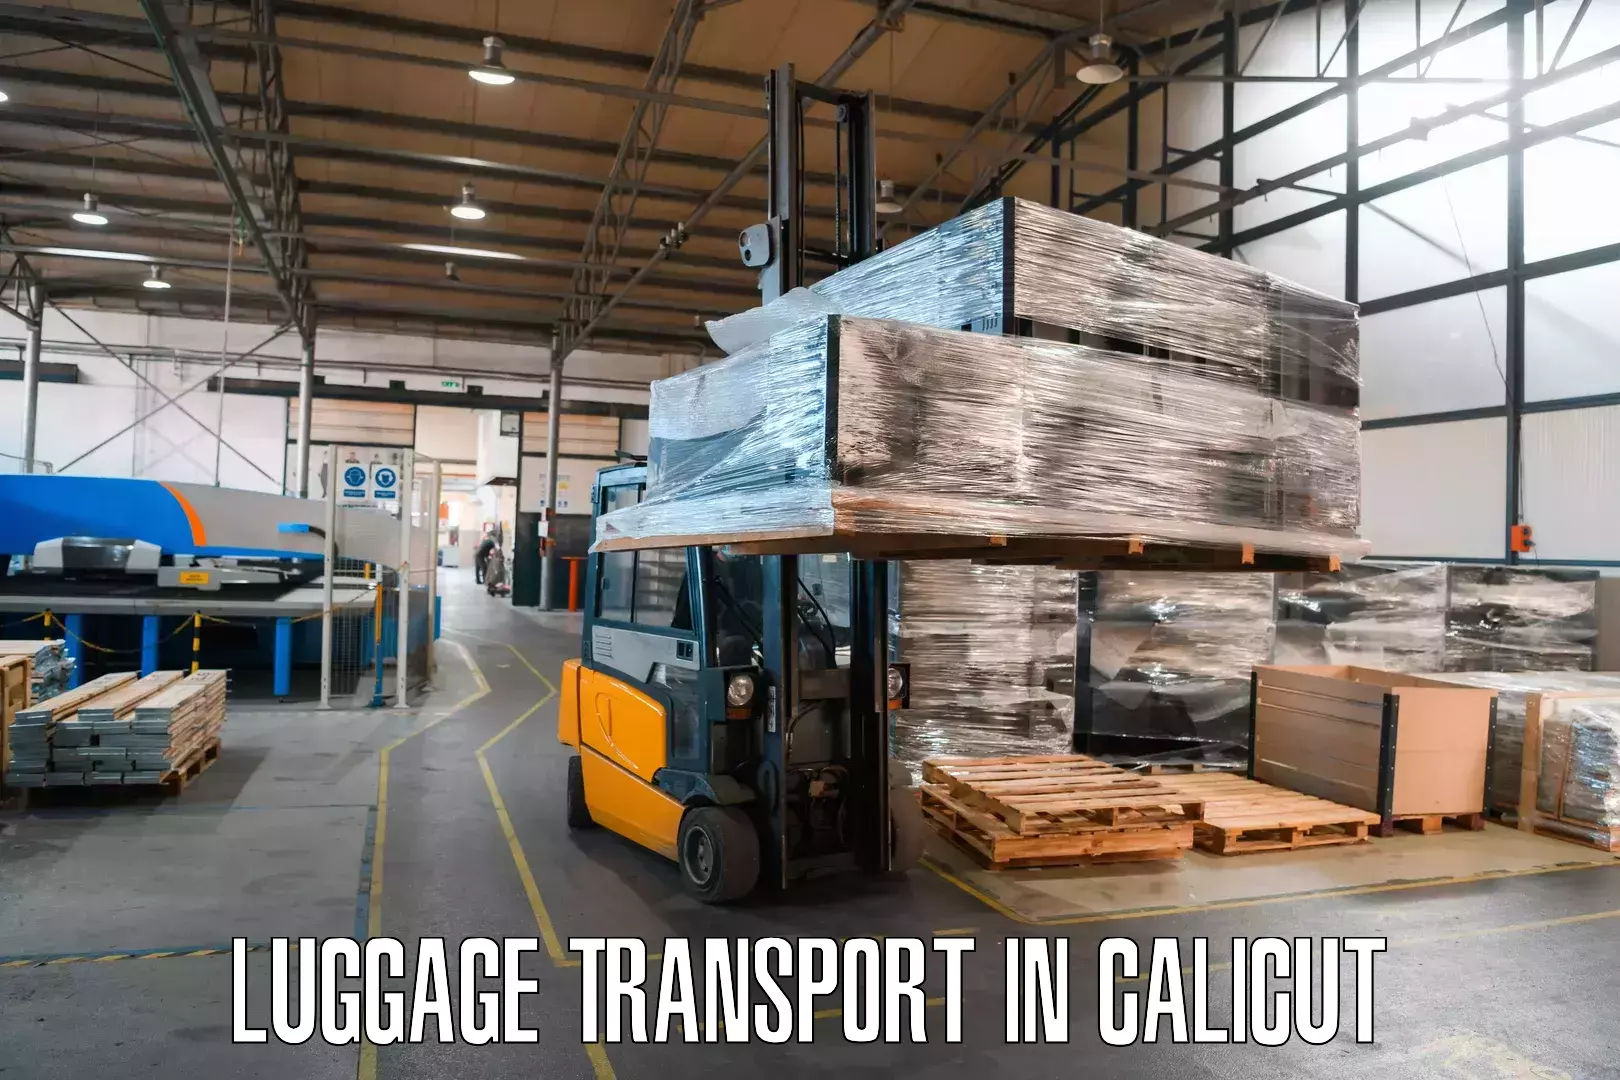 Baggage transport services in Calicut